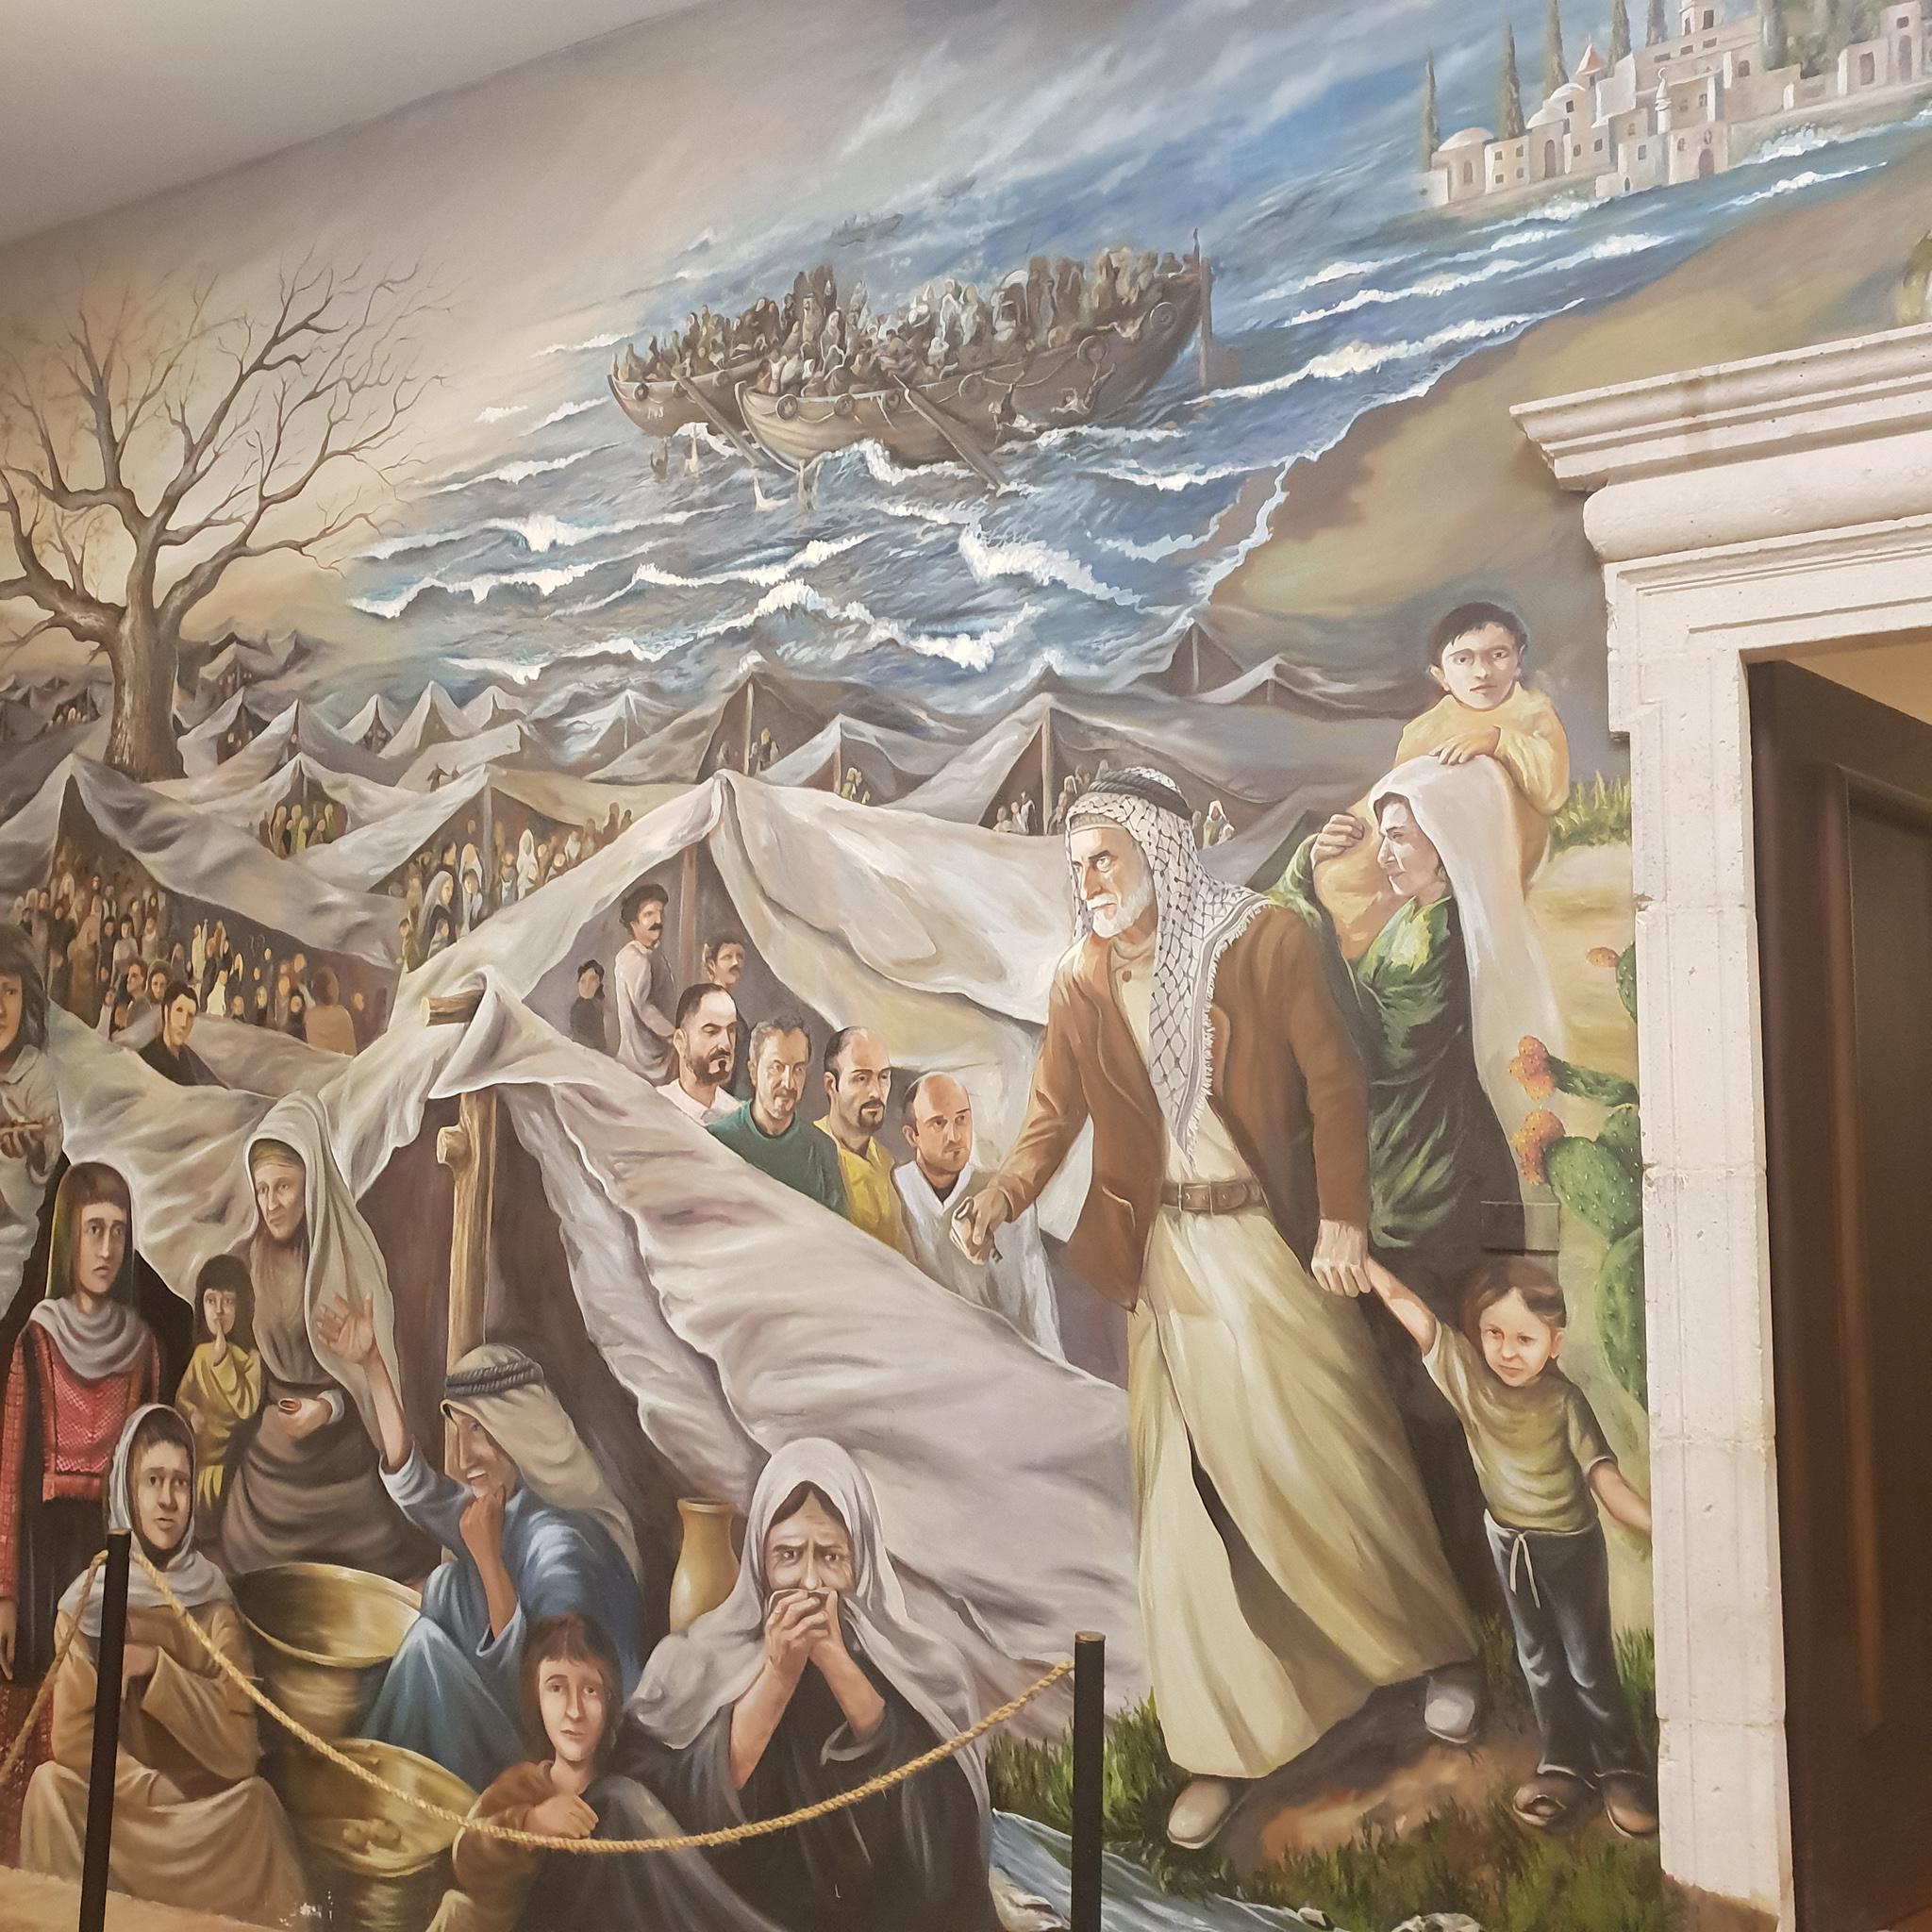 A wall-painting in the basement of Munib Musri's Italianate villa depicts the 'Nakba' – the Arab exodus from Palestine in 1948